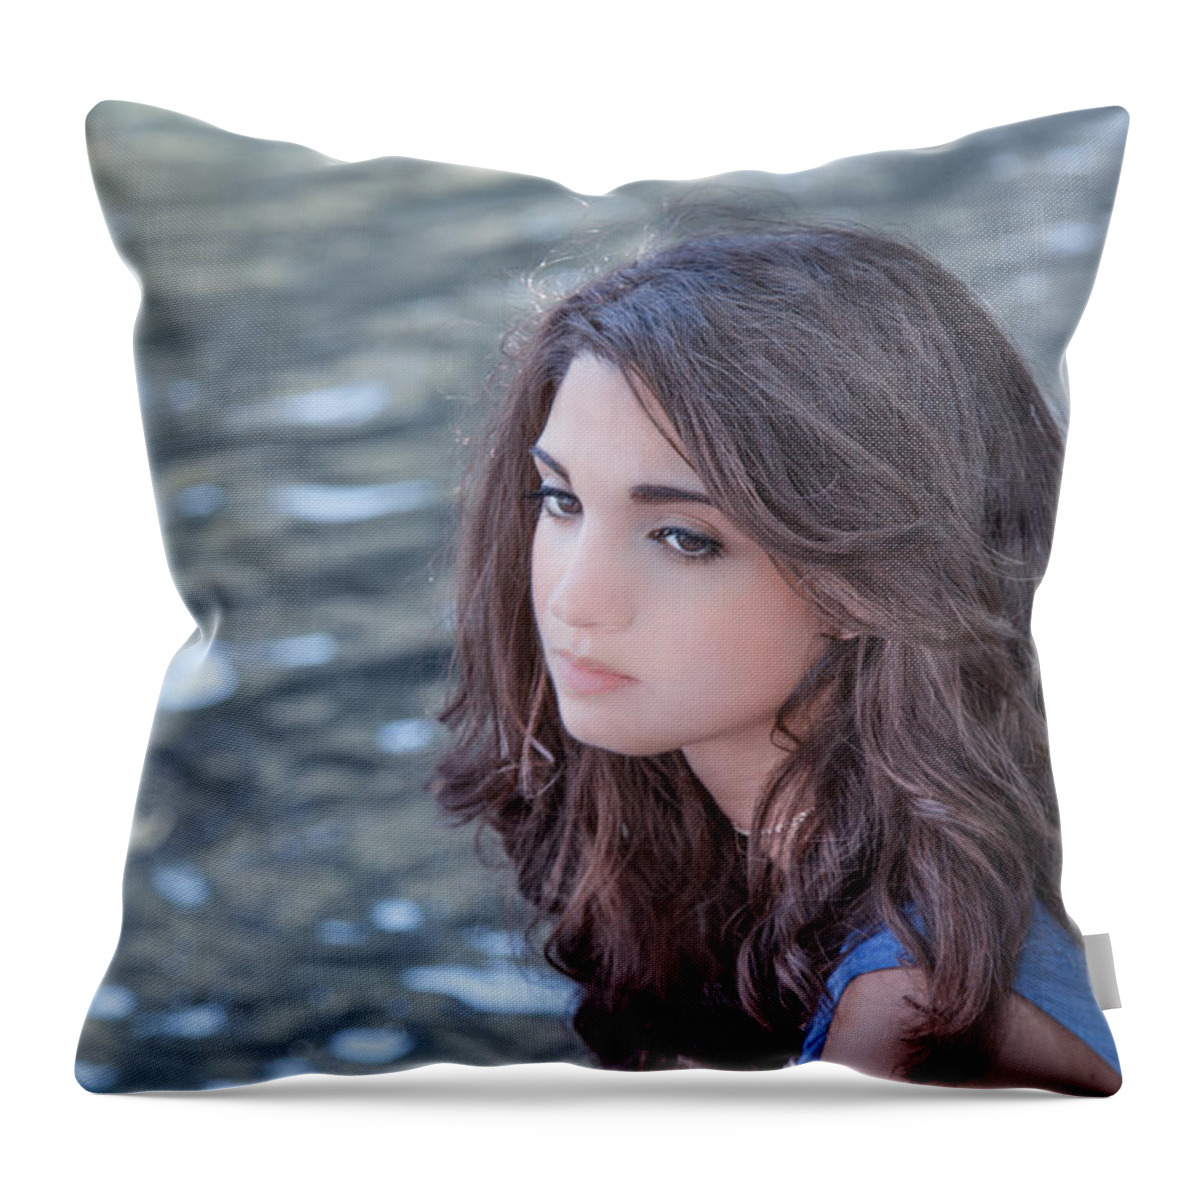 Alone Throw Pillow featuring the photograph Mistress Of Dreams by Evelina Kremsdorf